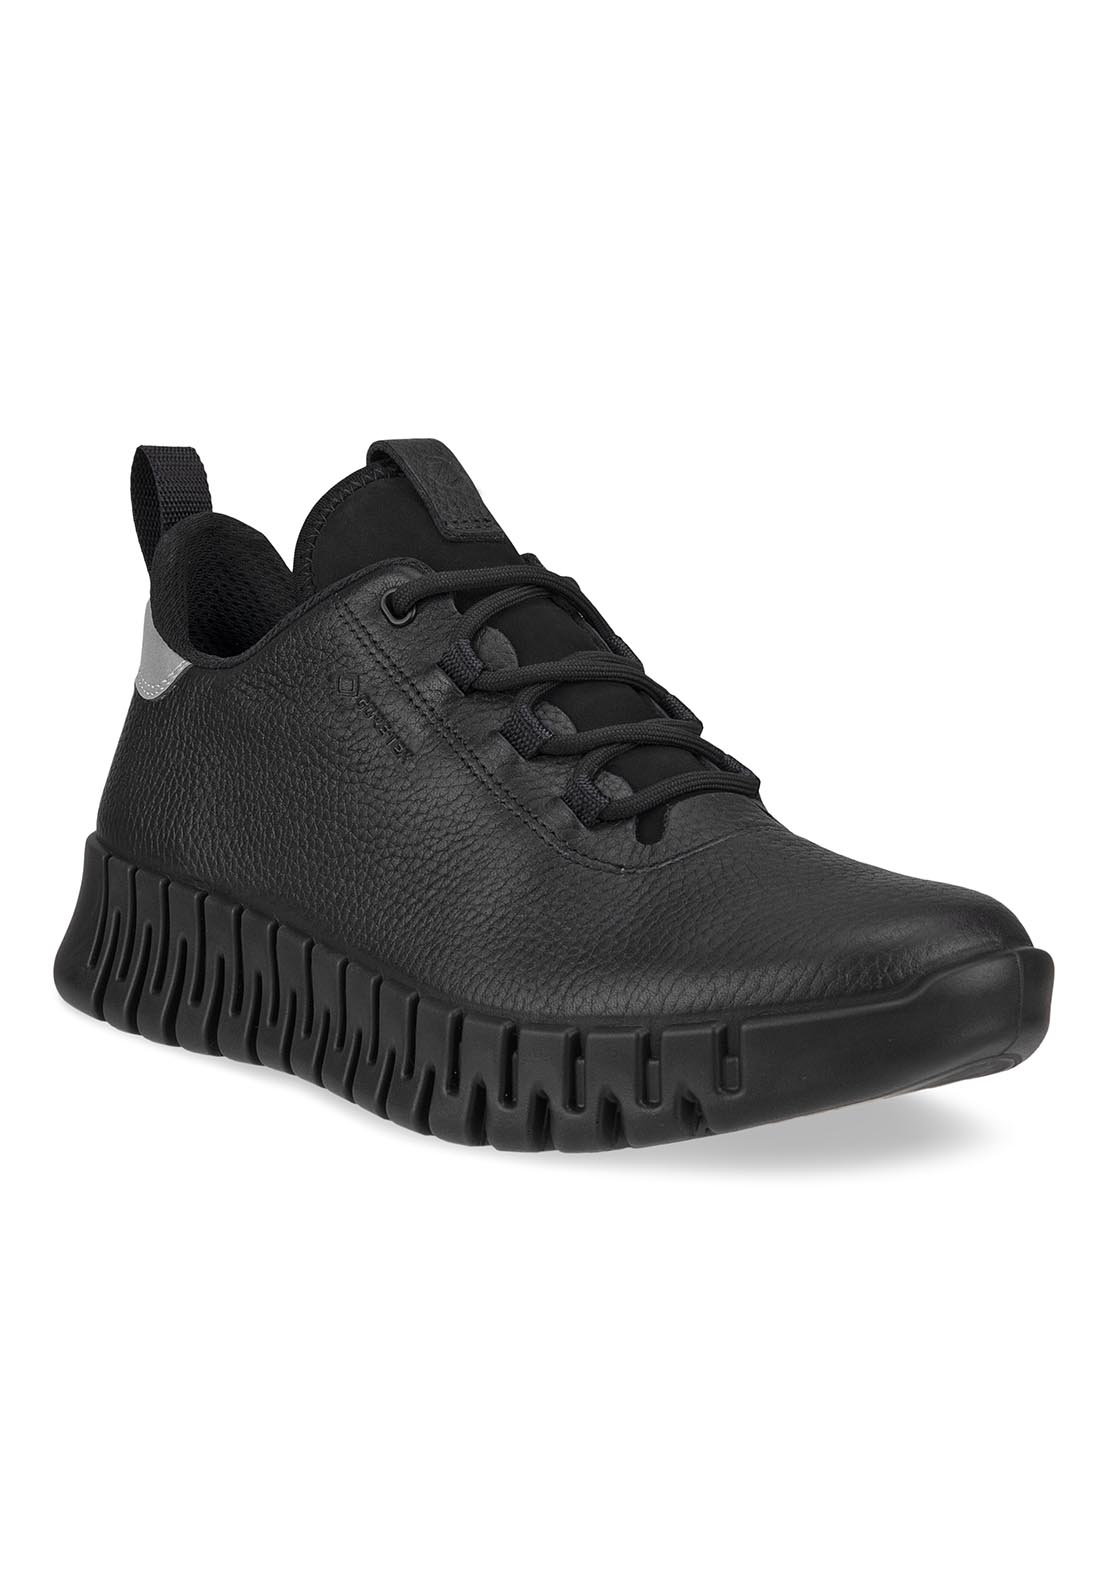 Ecco Gruuv Casual Runner 1 Shaws Department Stores